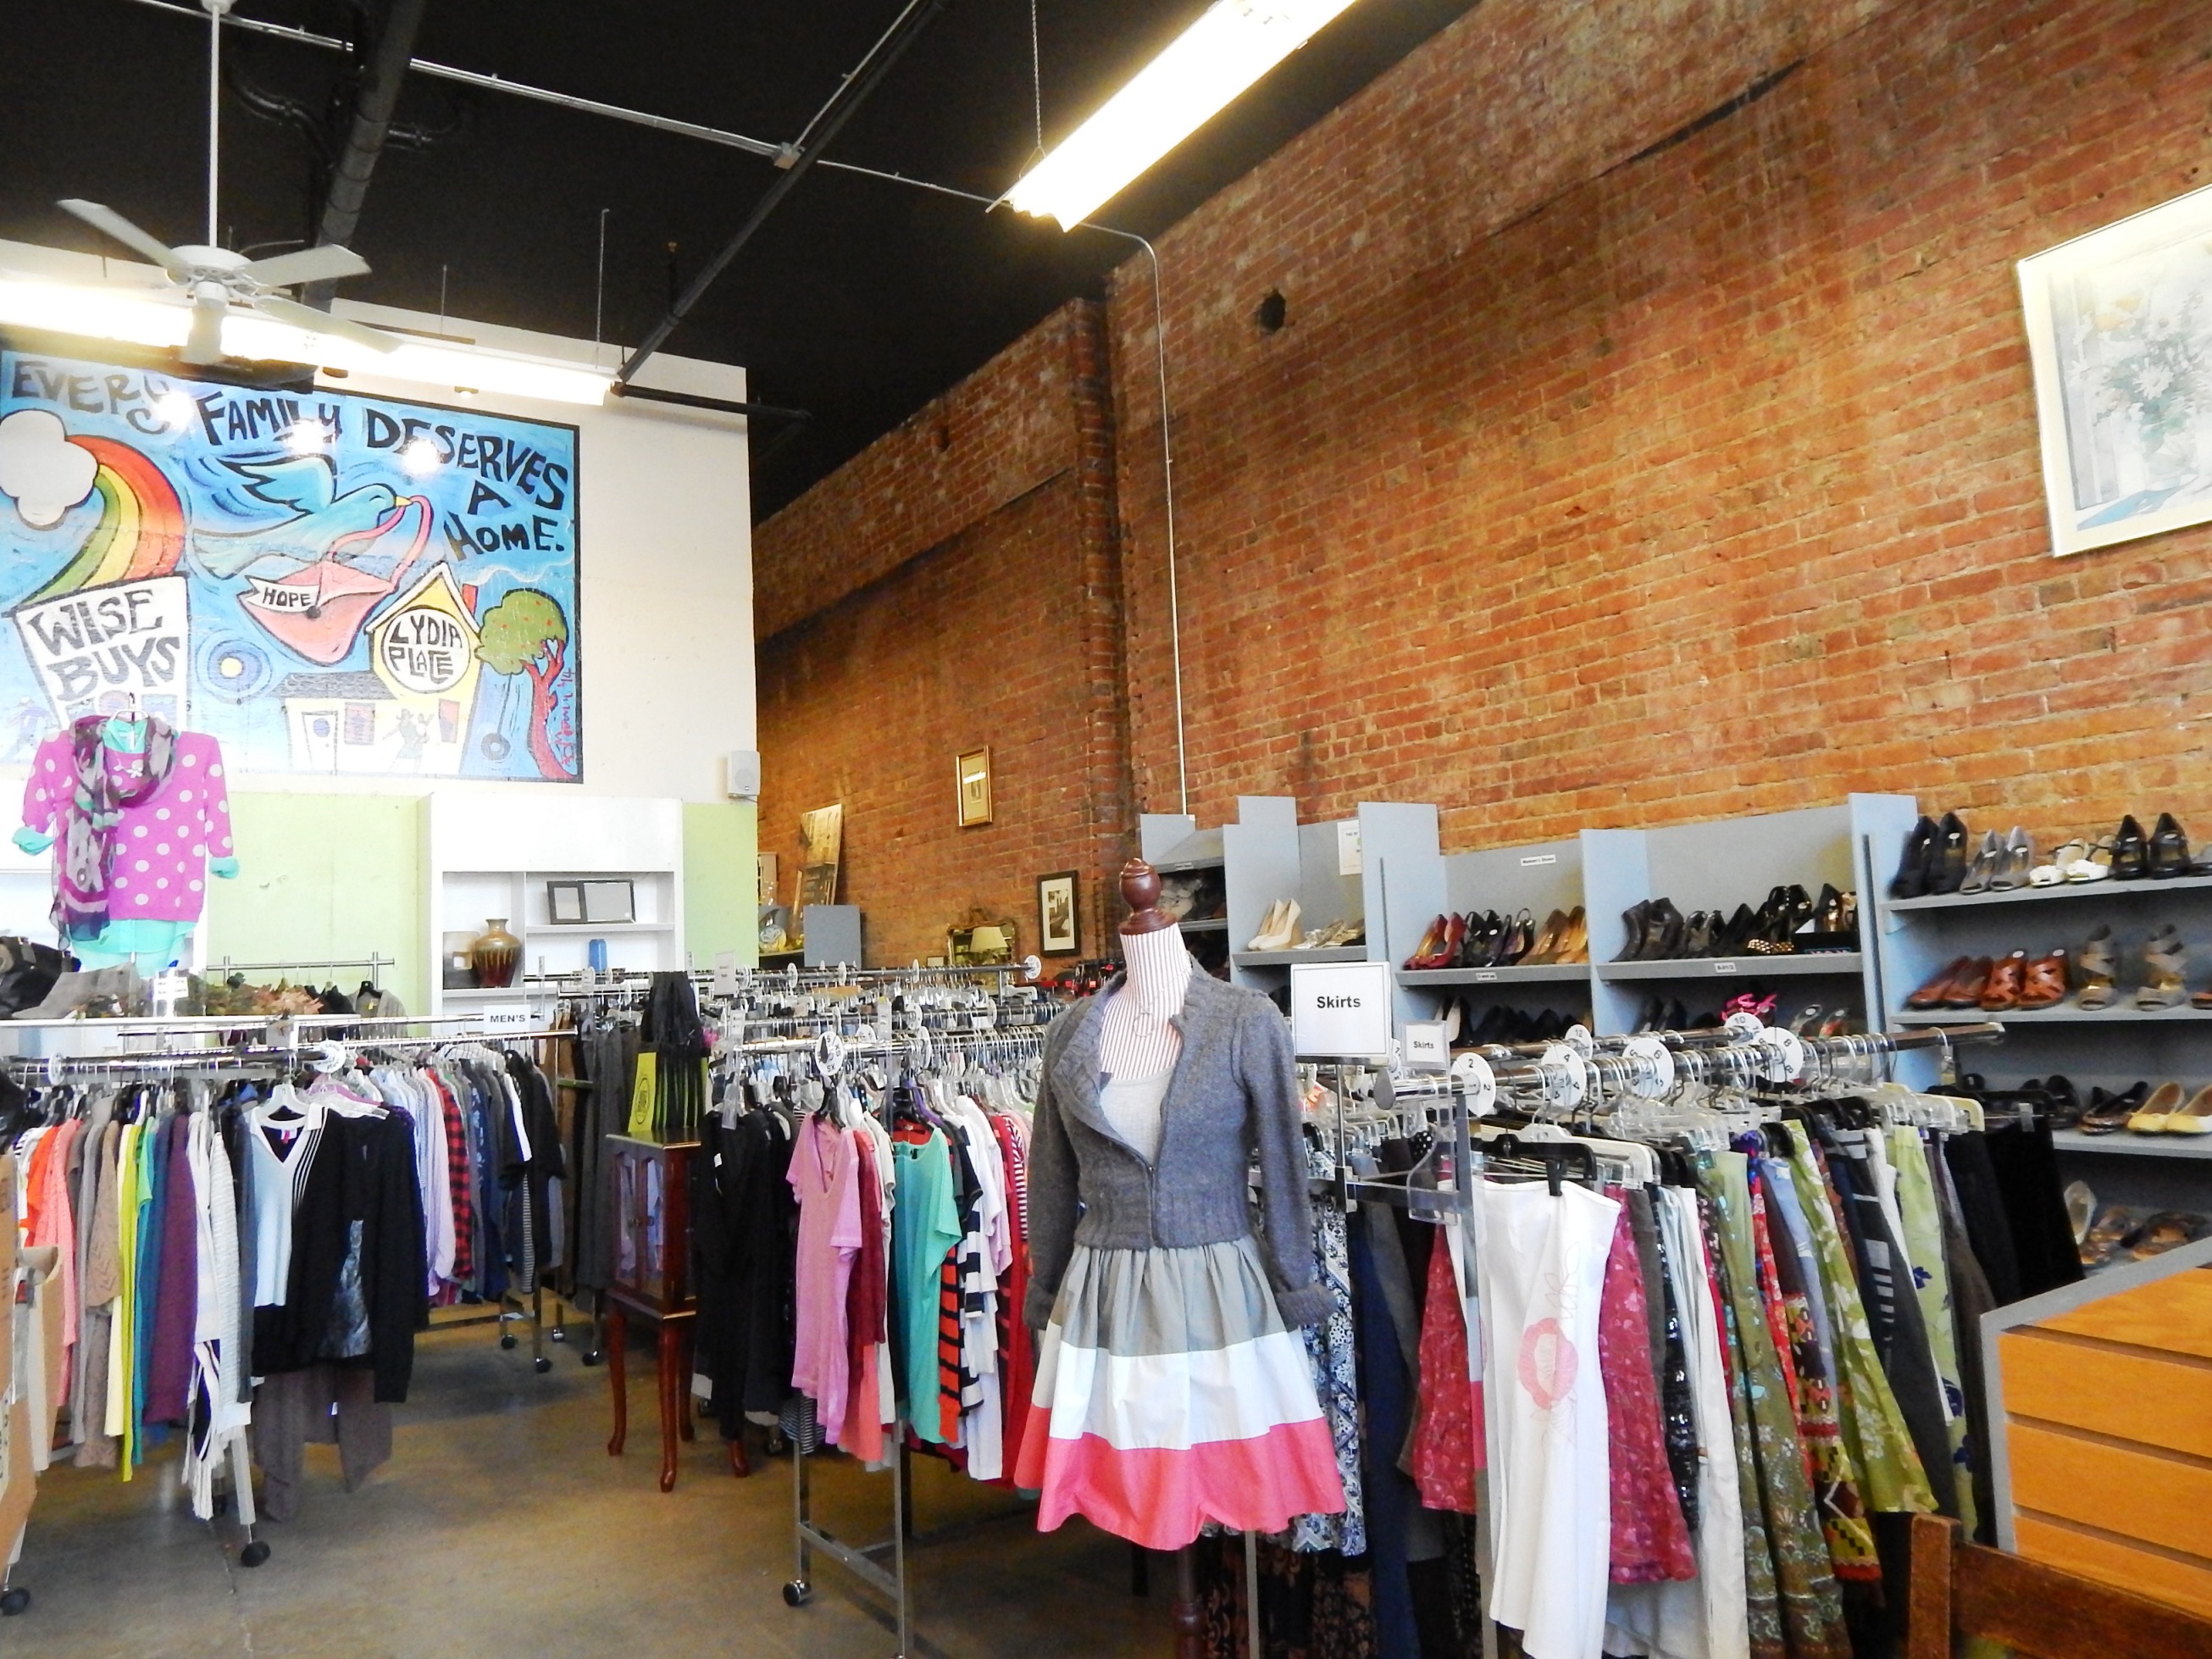 Get Thrifty on North State Street with Wise Buys, Bargains for a Good ...